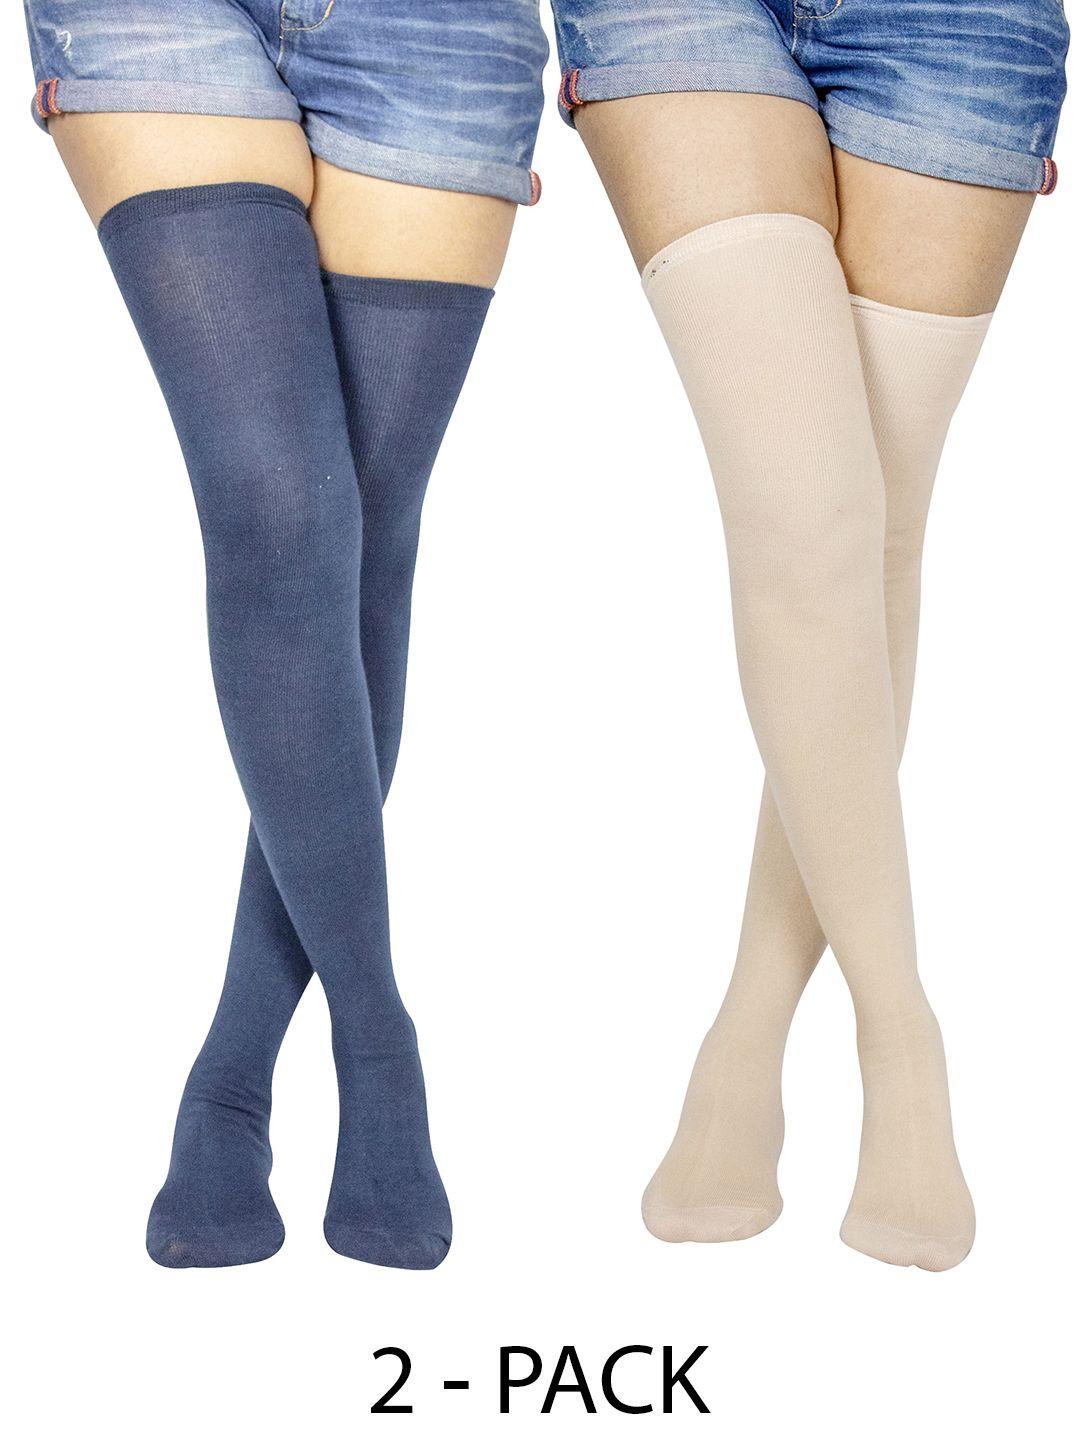 baesd pack of 2 cotton thigh-high stockings